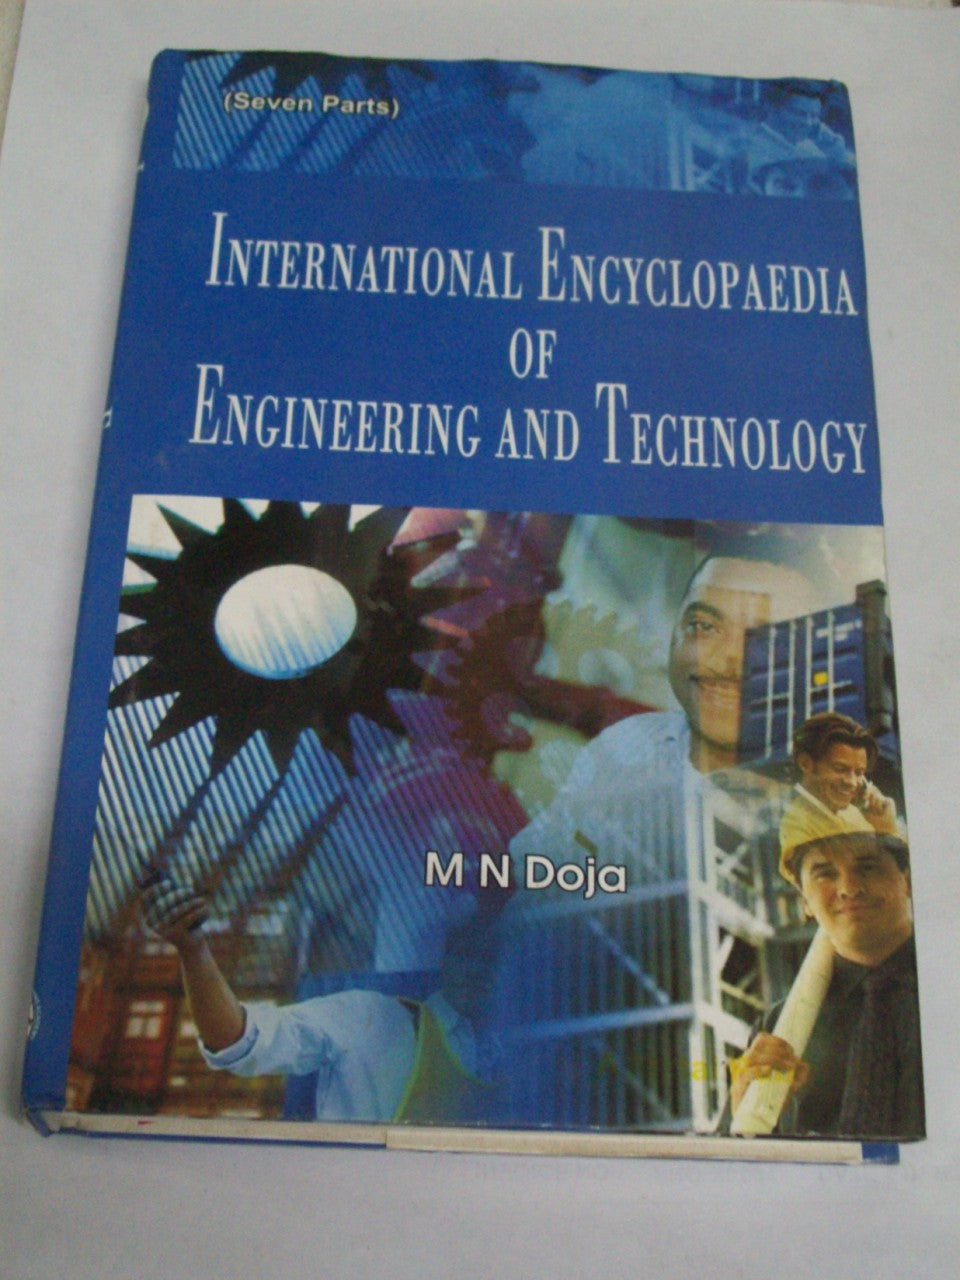 International Encyclopaedia of Engineering and Technology ( 7 Parts)